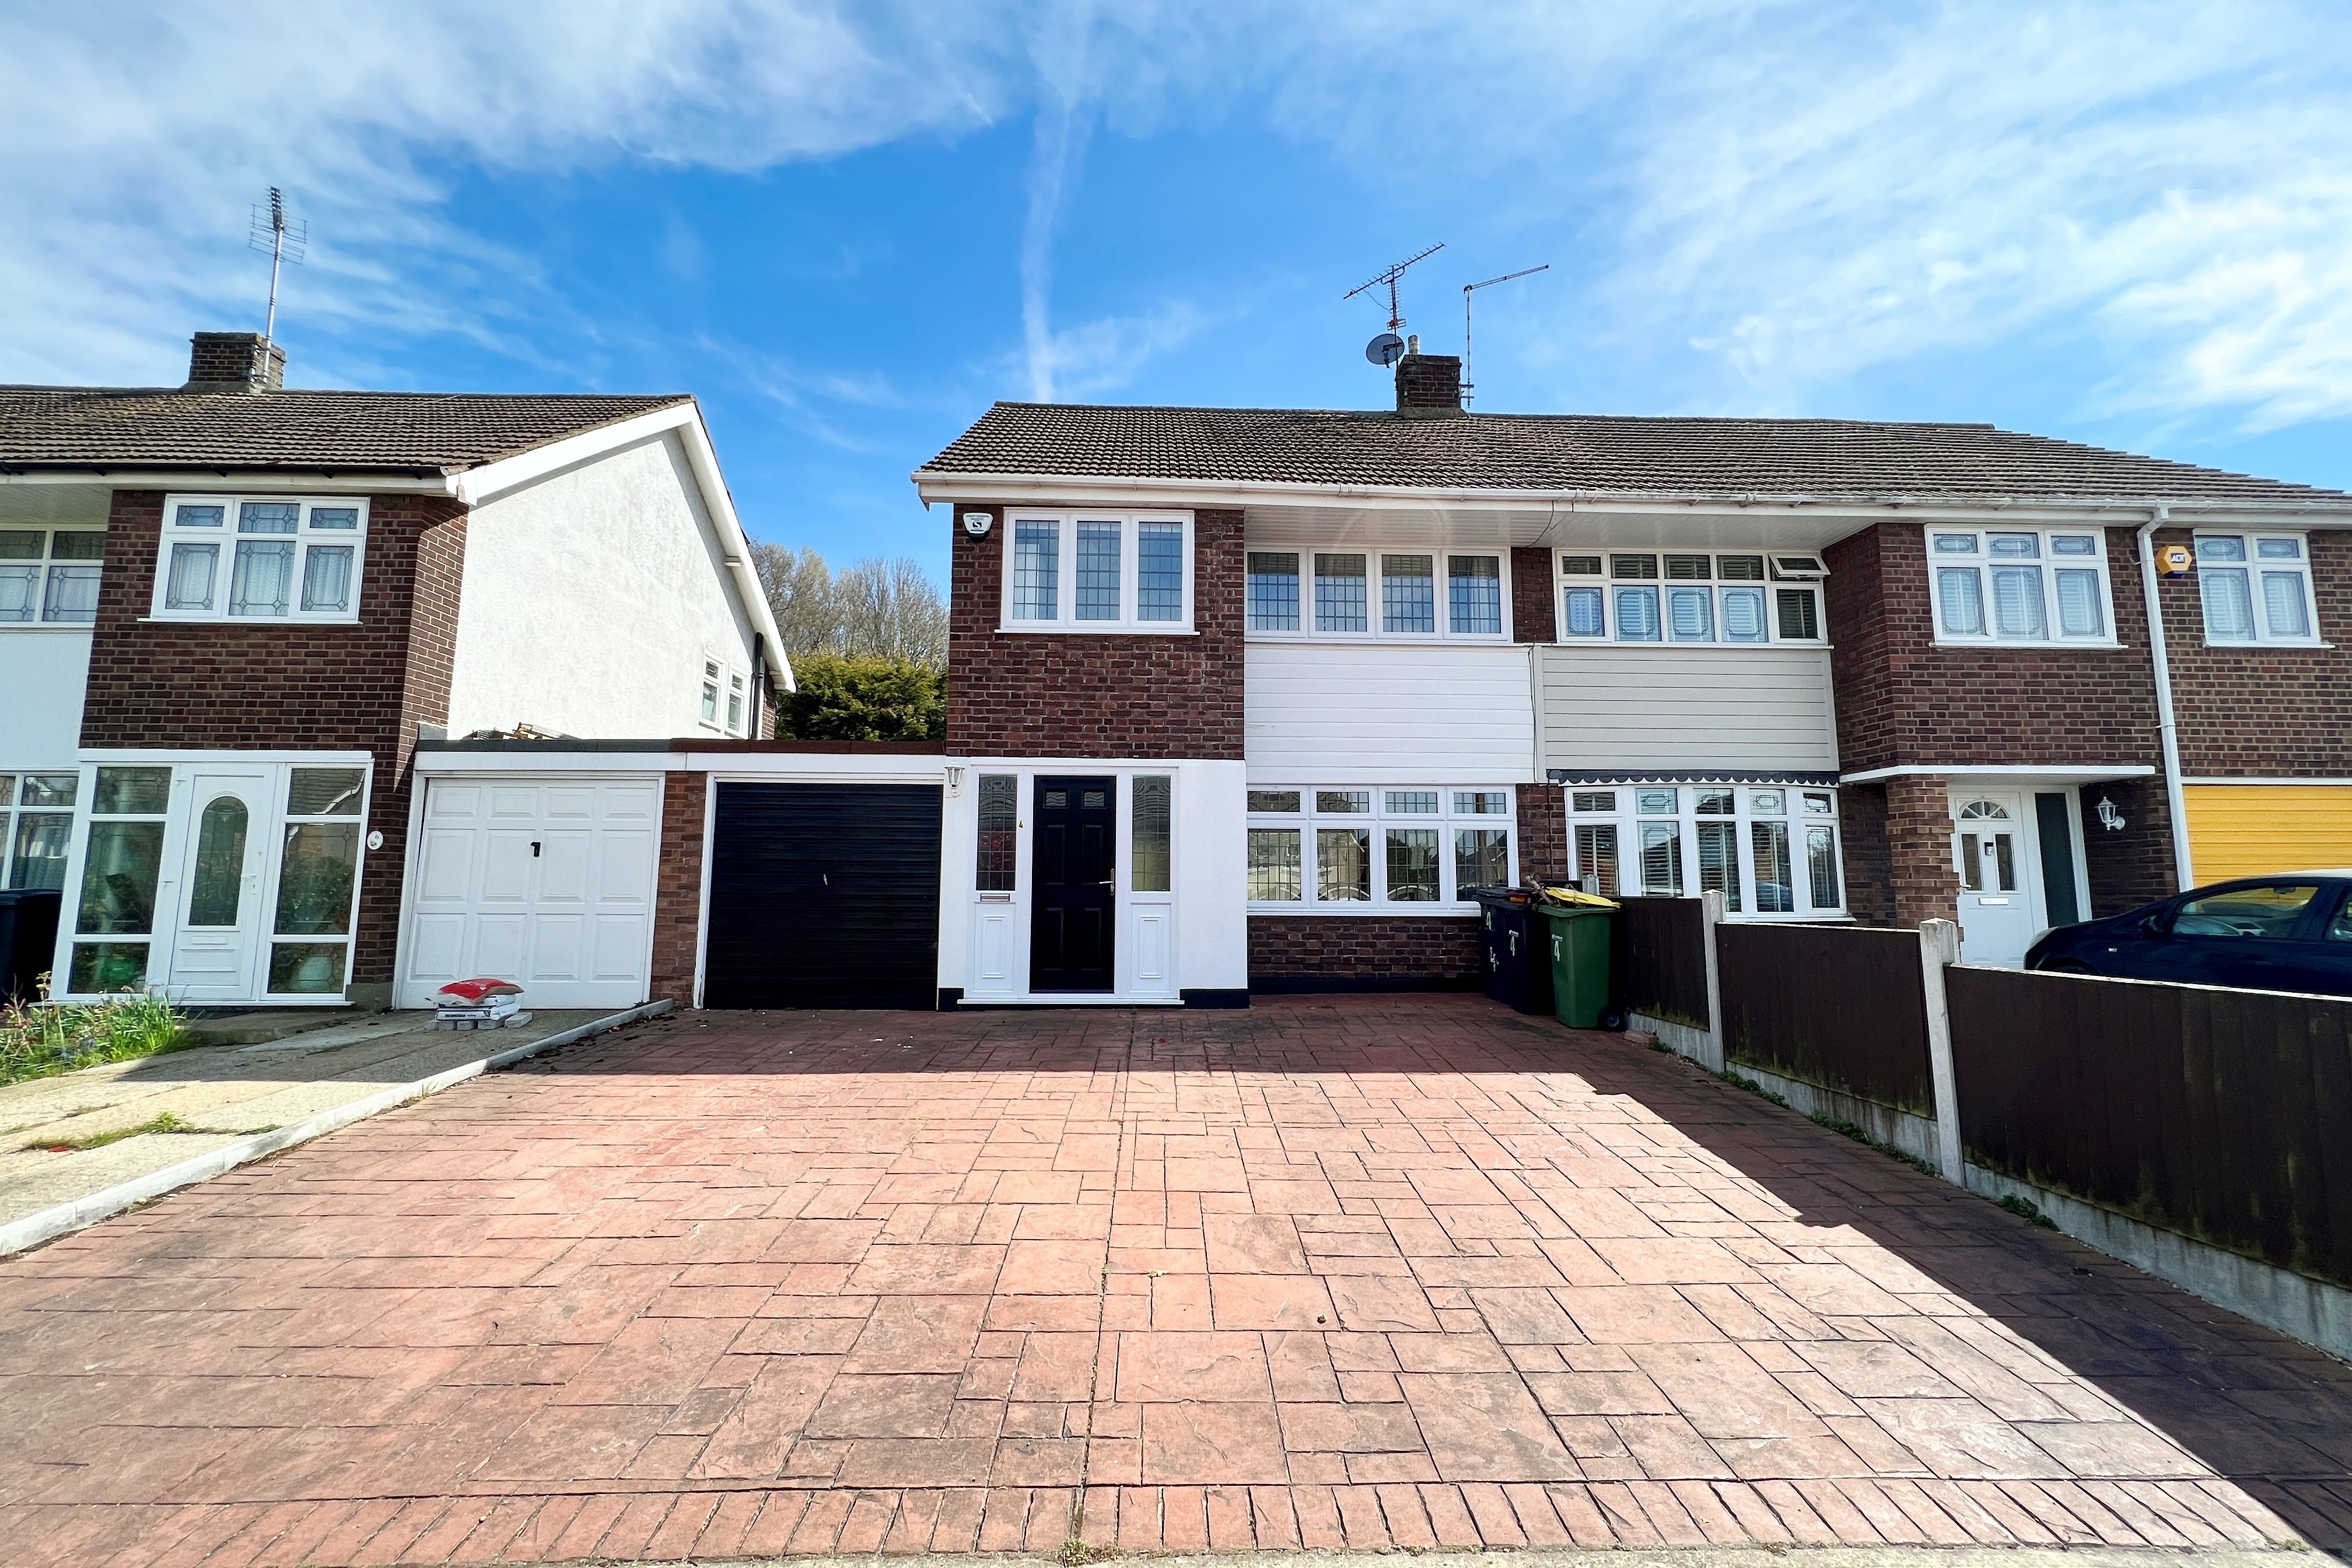 3 bed semi-detached house for sale in Fairland Close, Rayleigh, SS6 